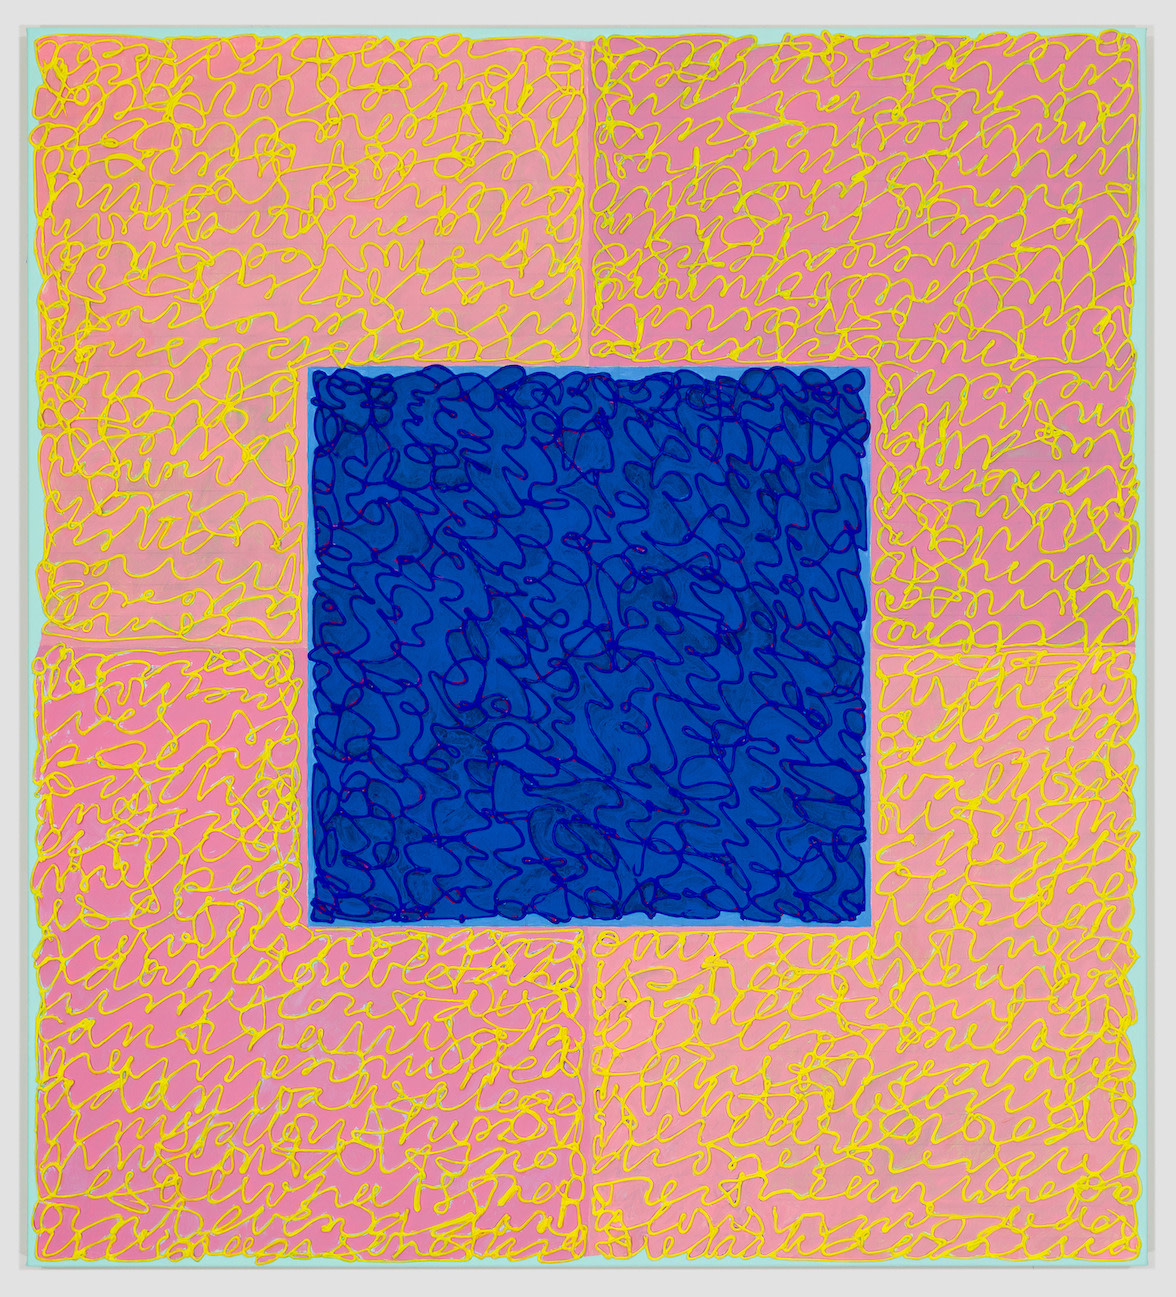 Blue Center, 2019, Acrylic paint and pastes on linen